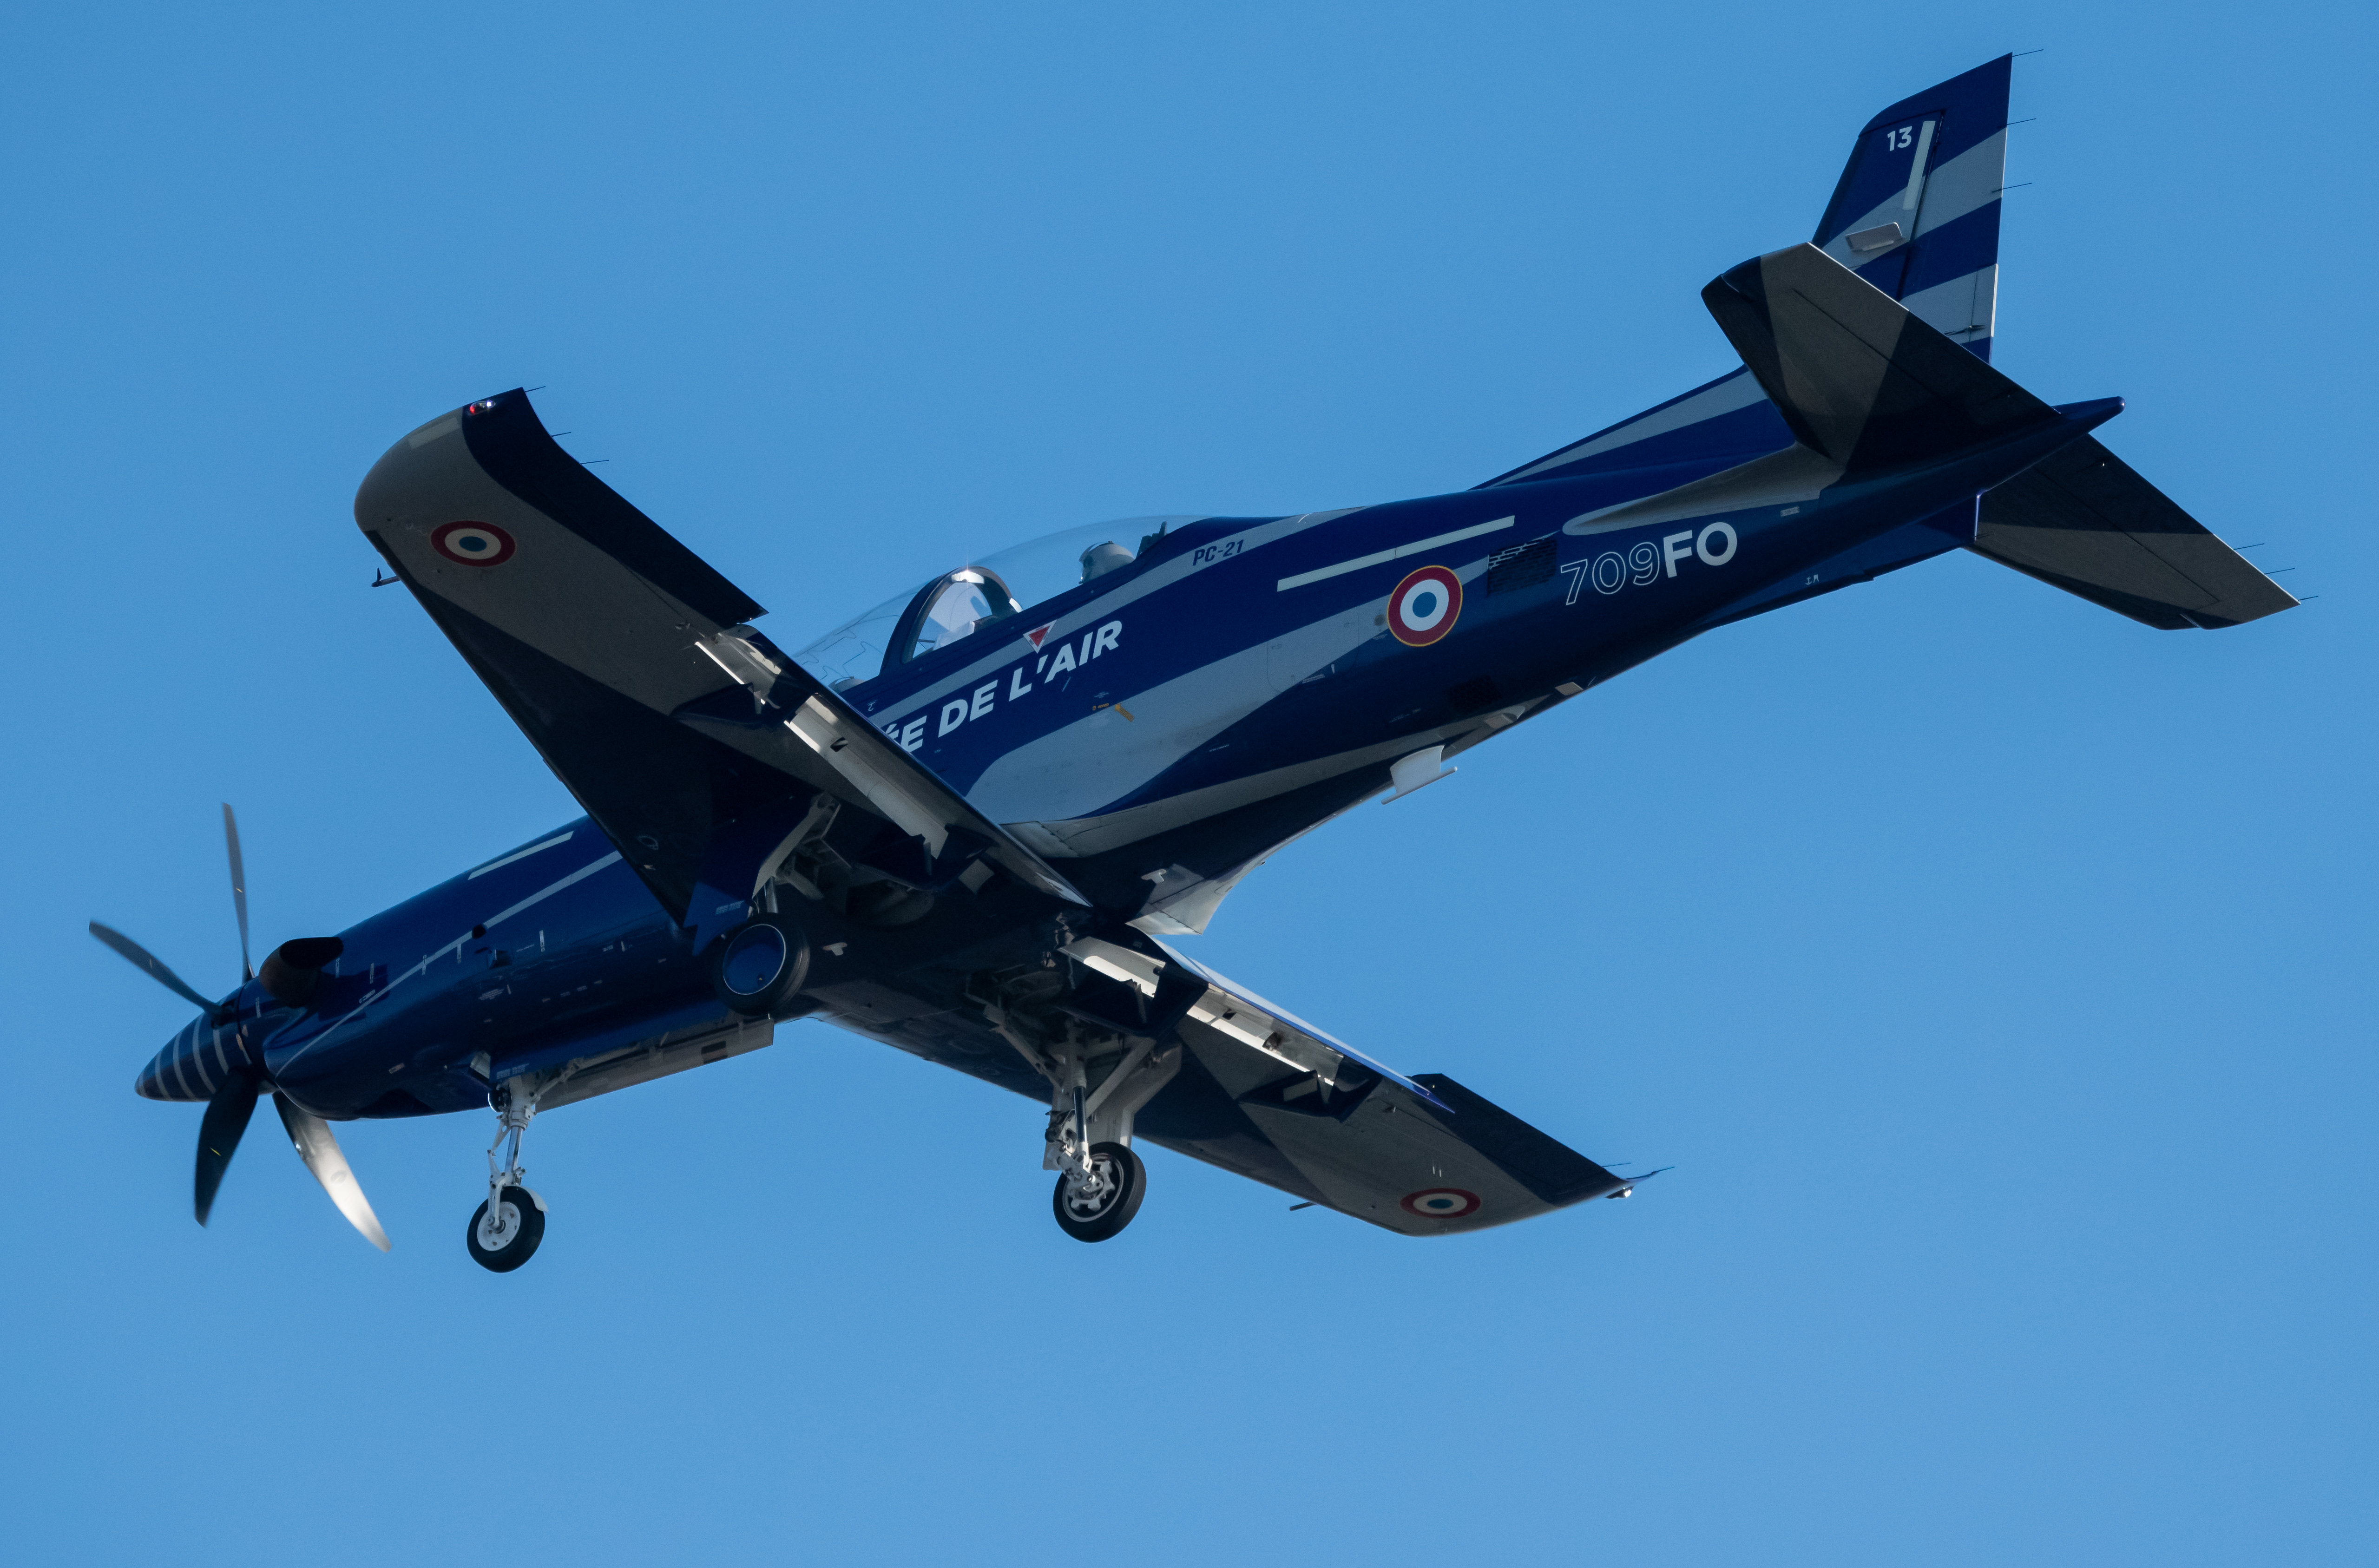 Additional PC-21s for the French Air Force